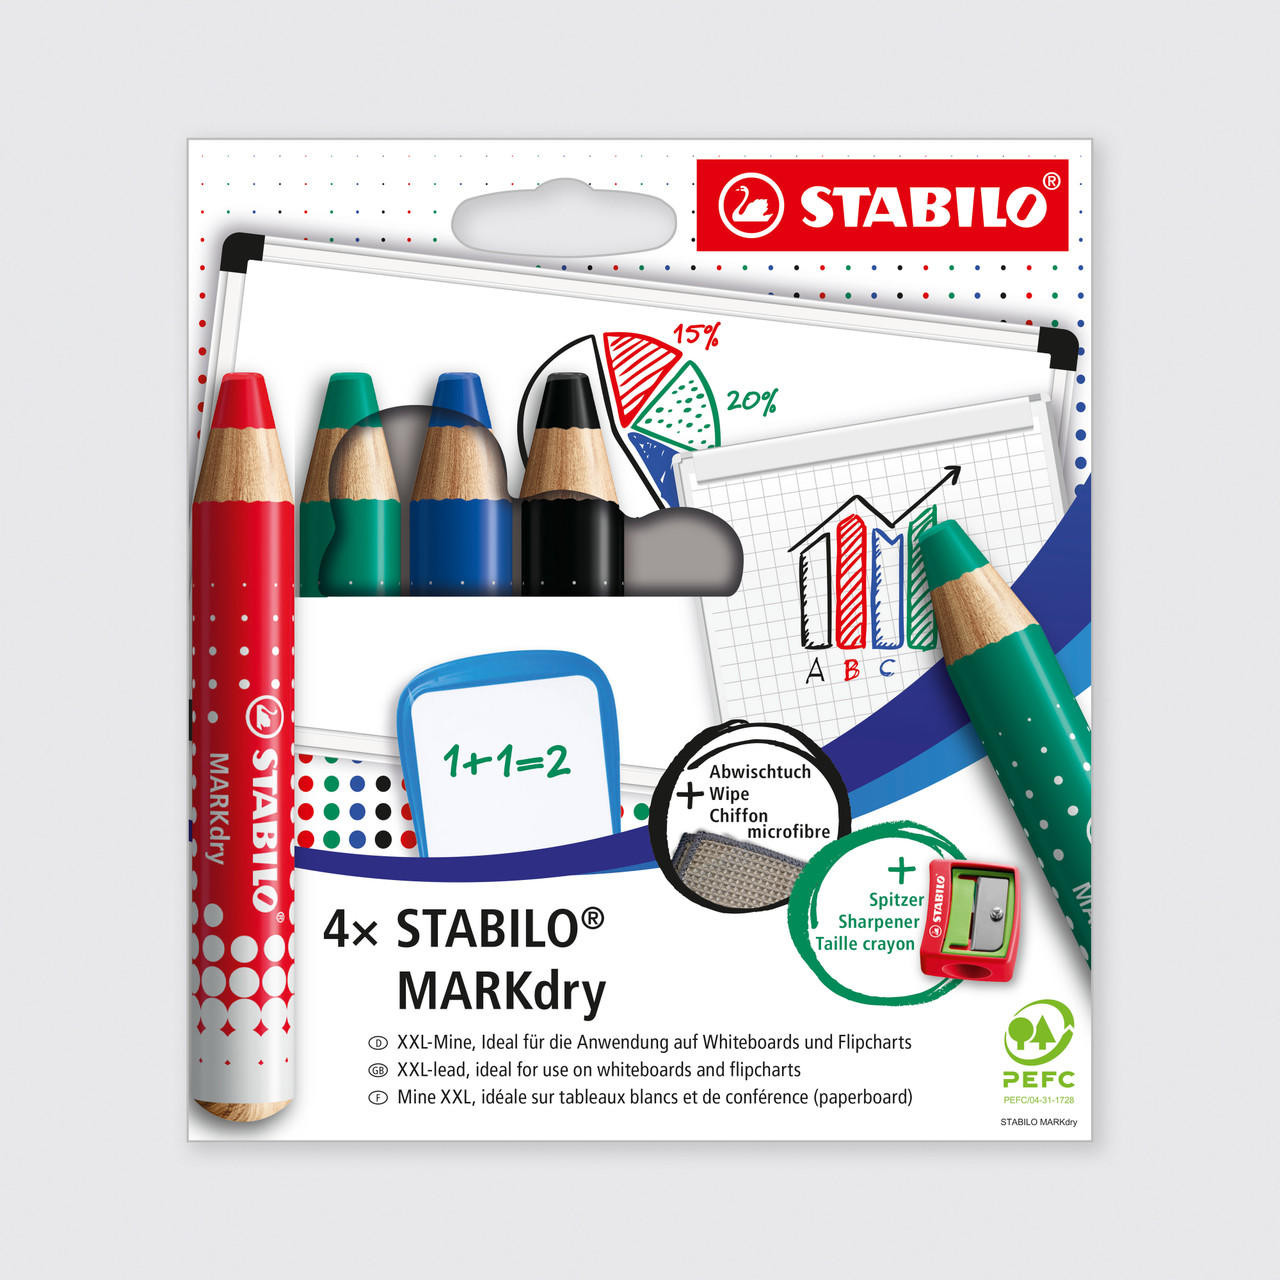 STABILO MARKdry Whiteboard Pencils with Sharpener and Wiping Cloth Assorted Colours Set of 4